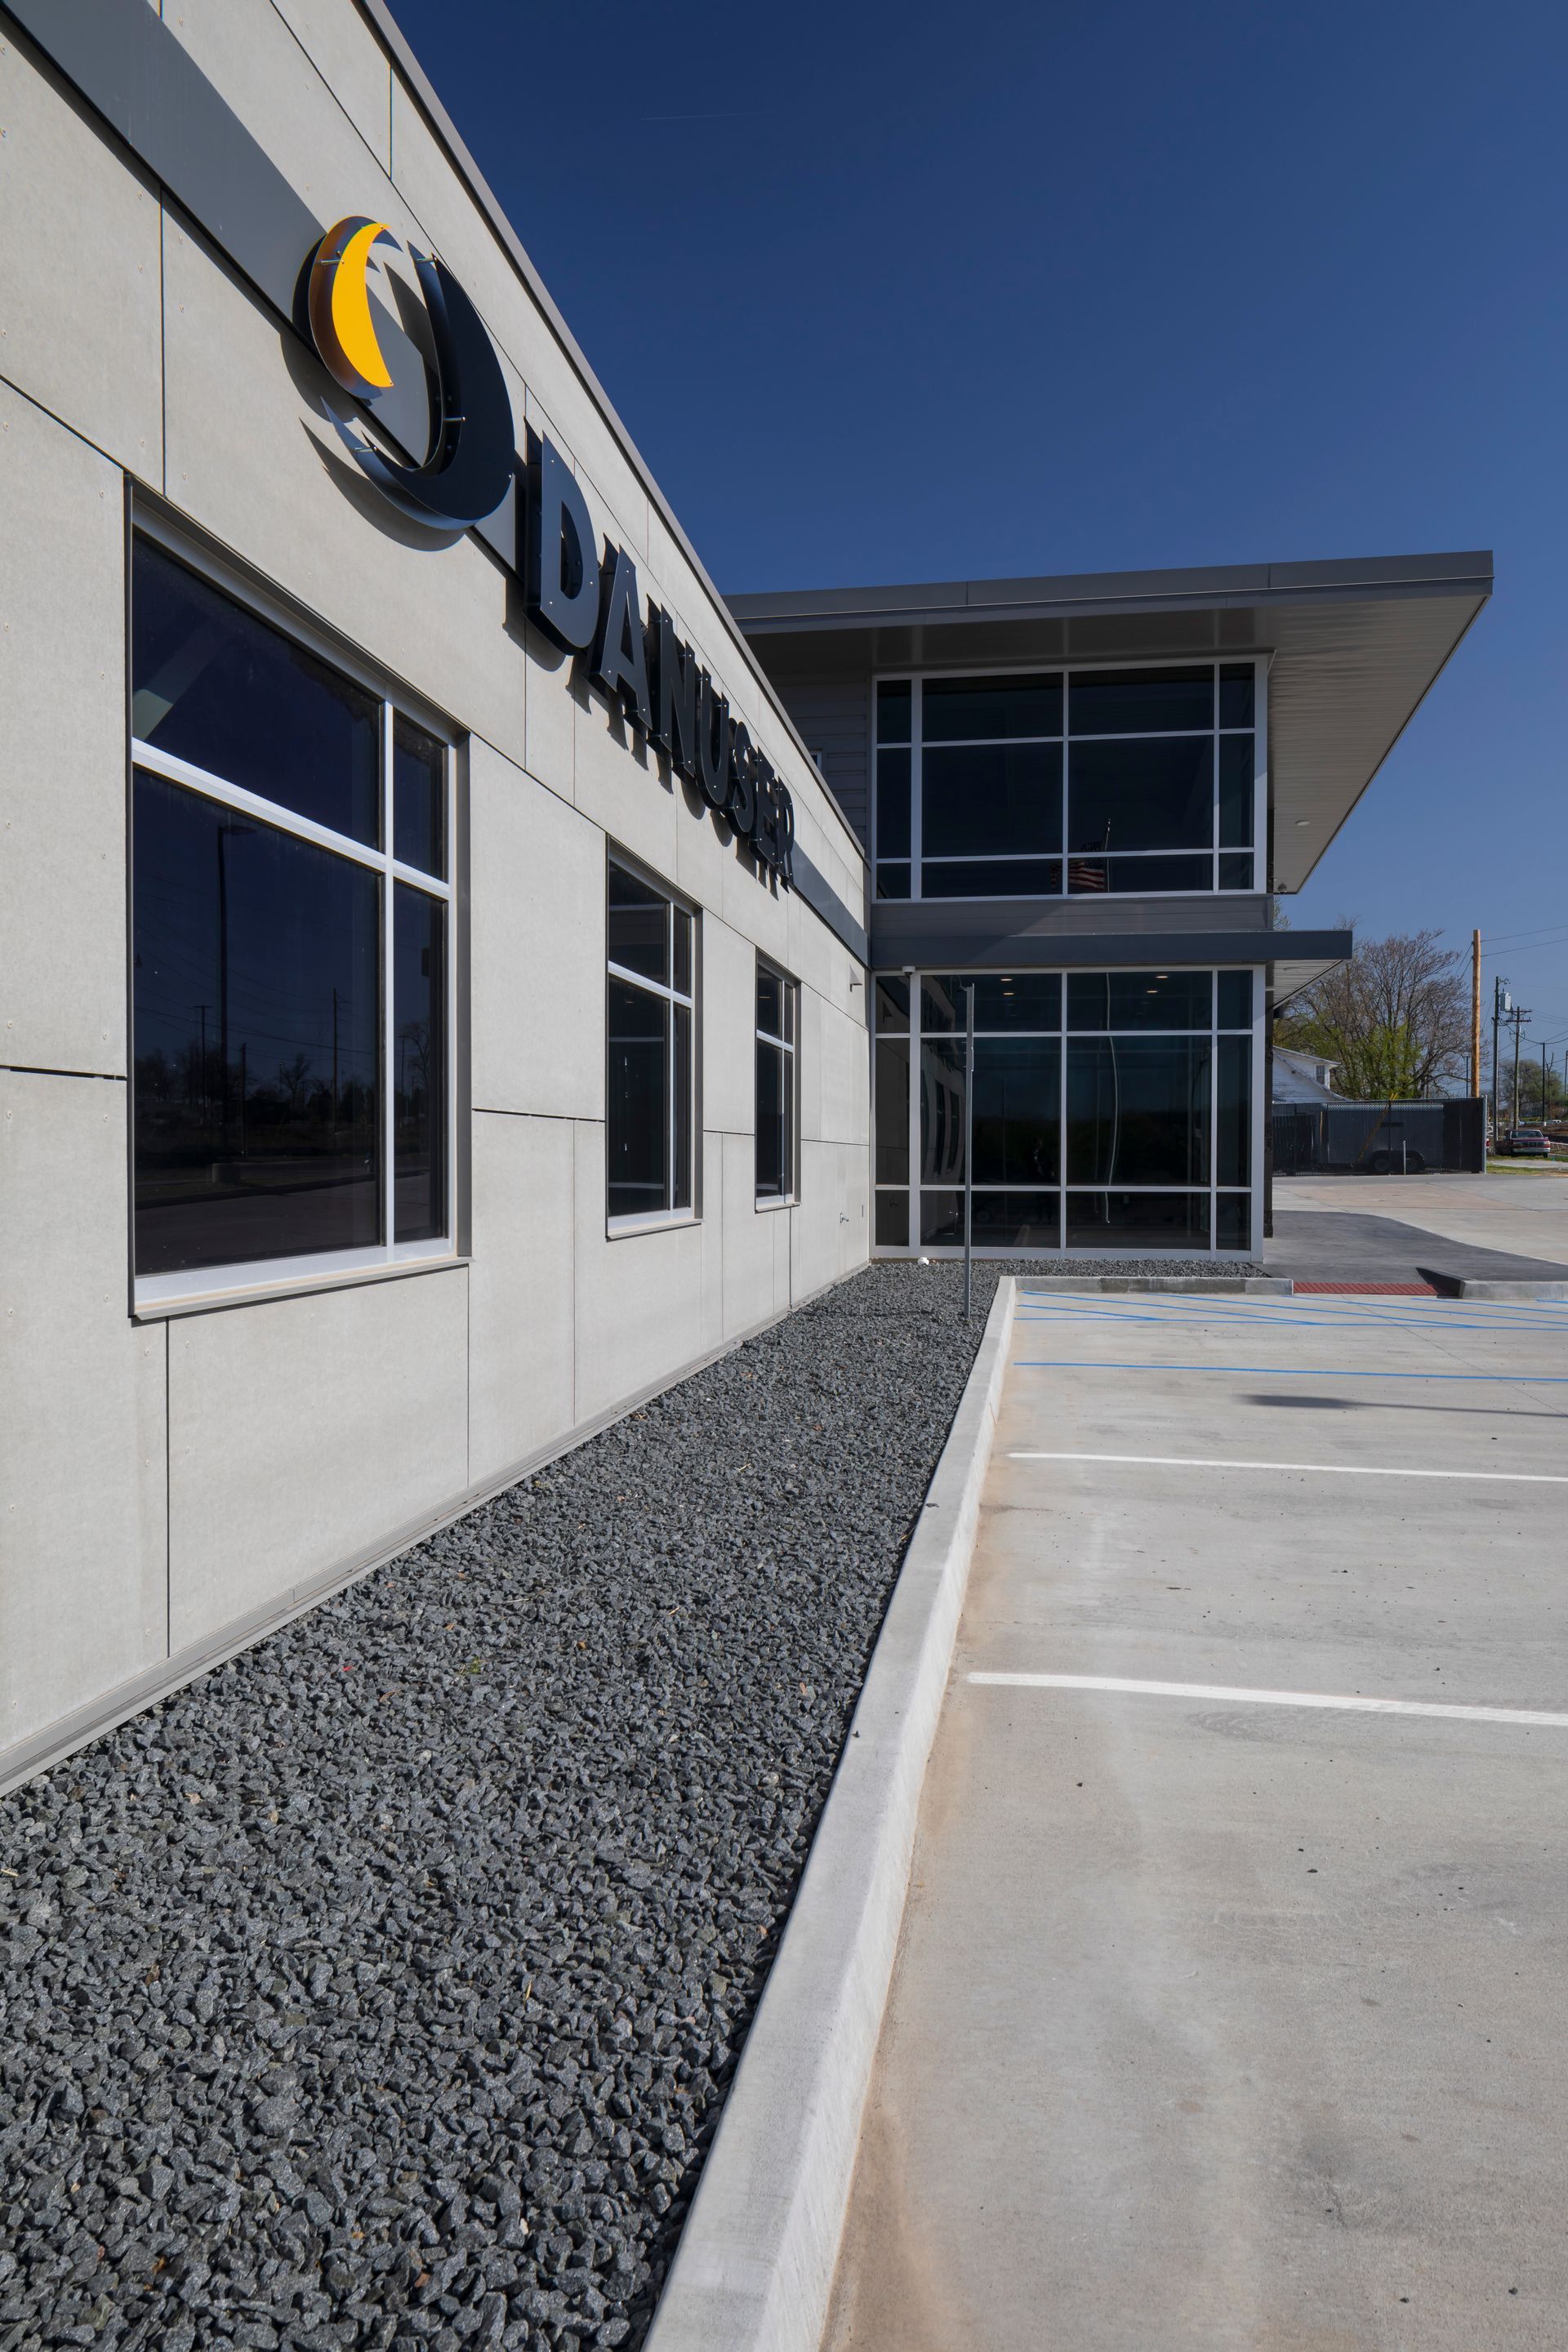 Design & Build a Stunning Office Building in Mexico, MO With Professional Contractors & Engineers.